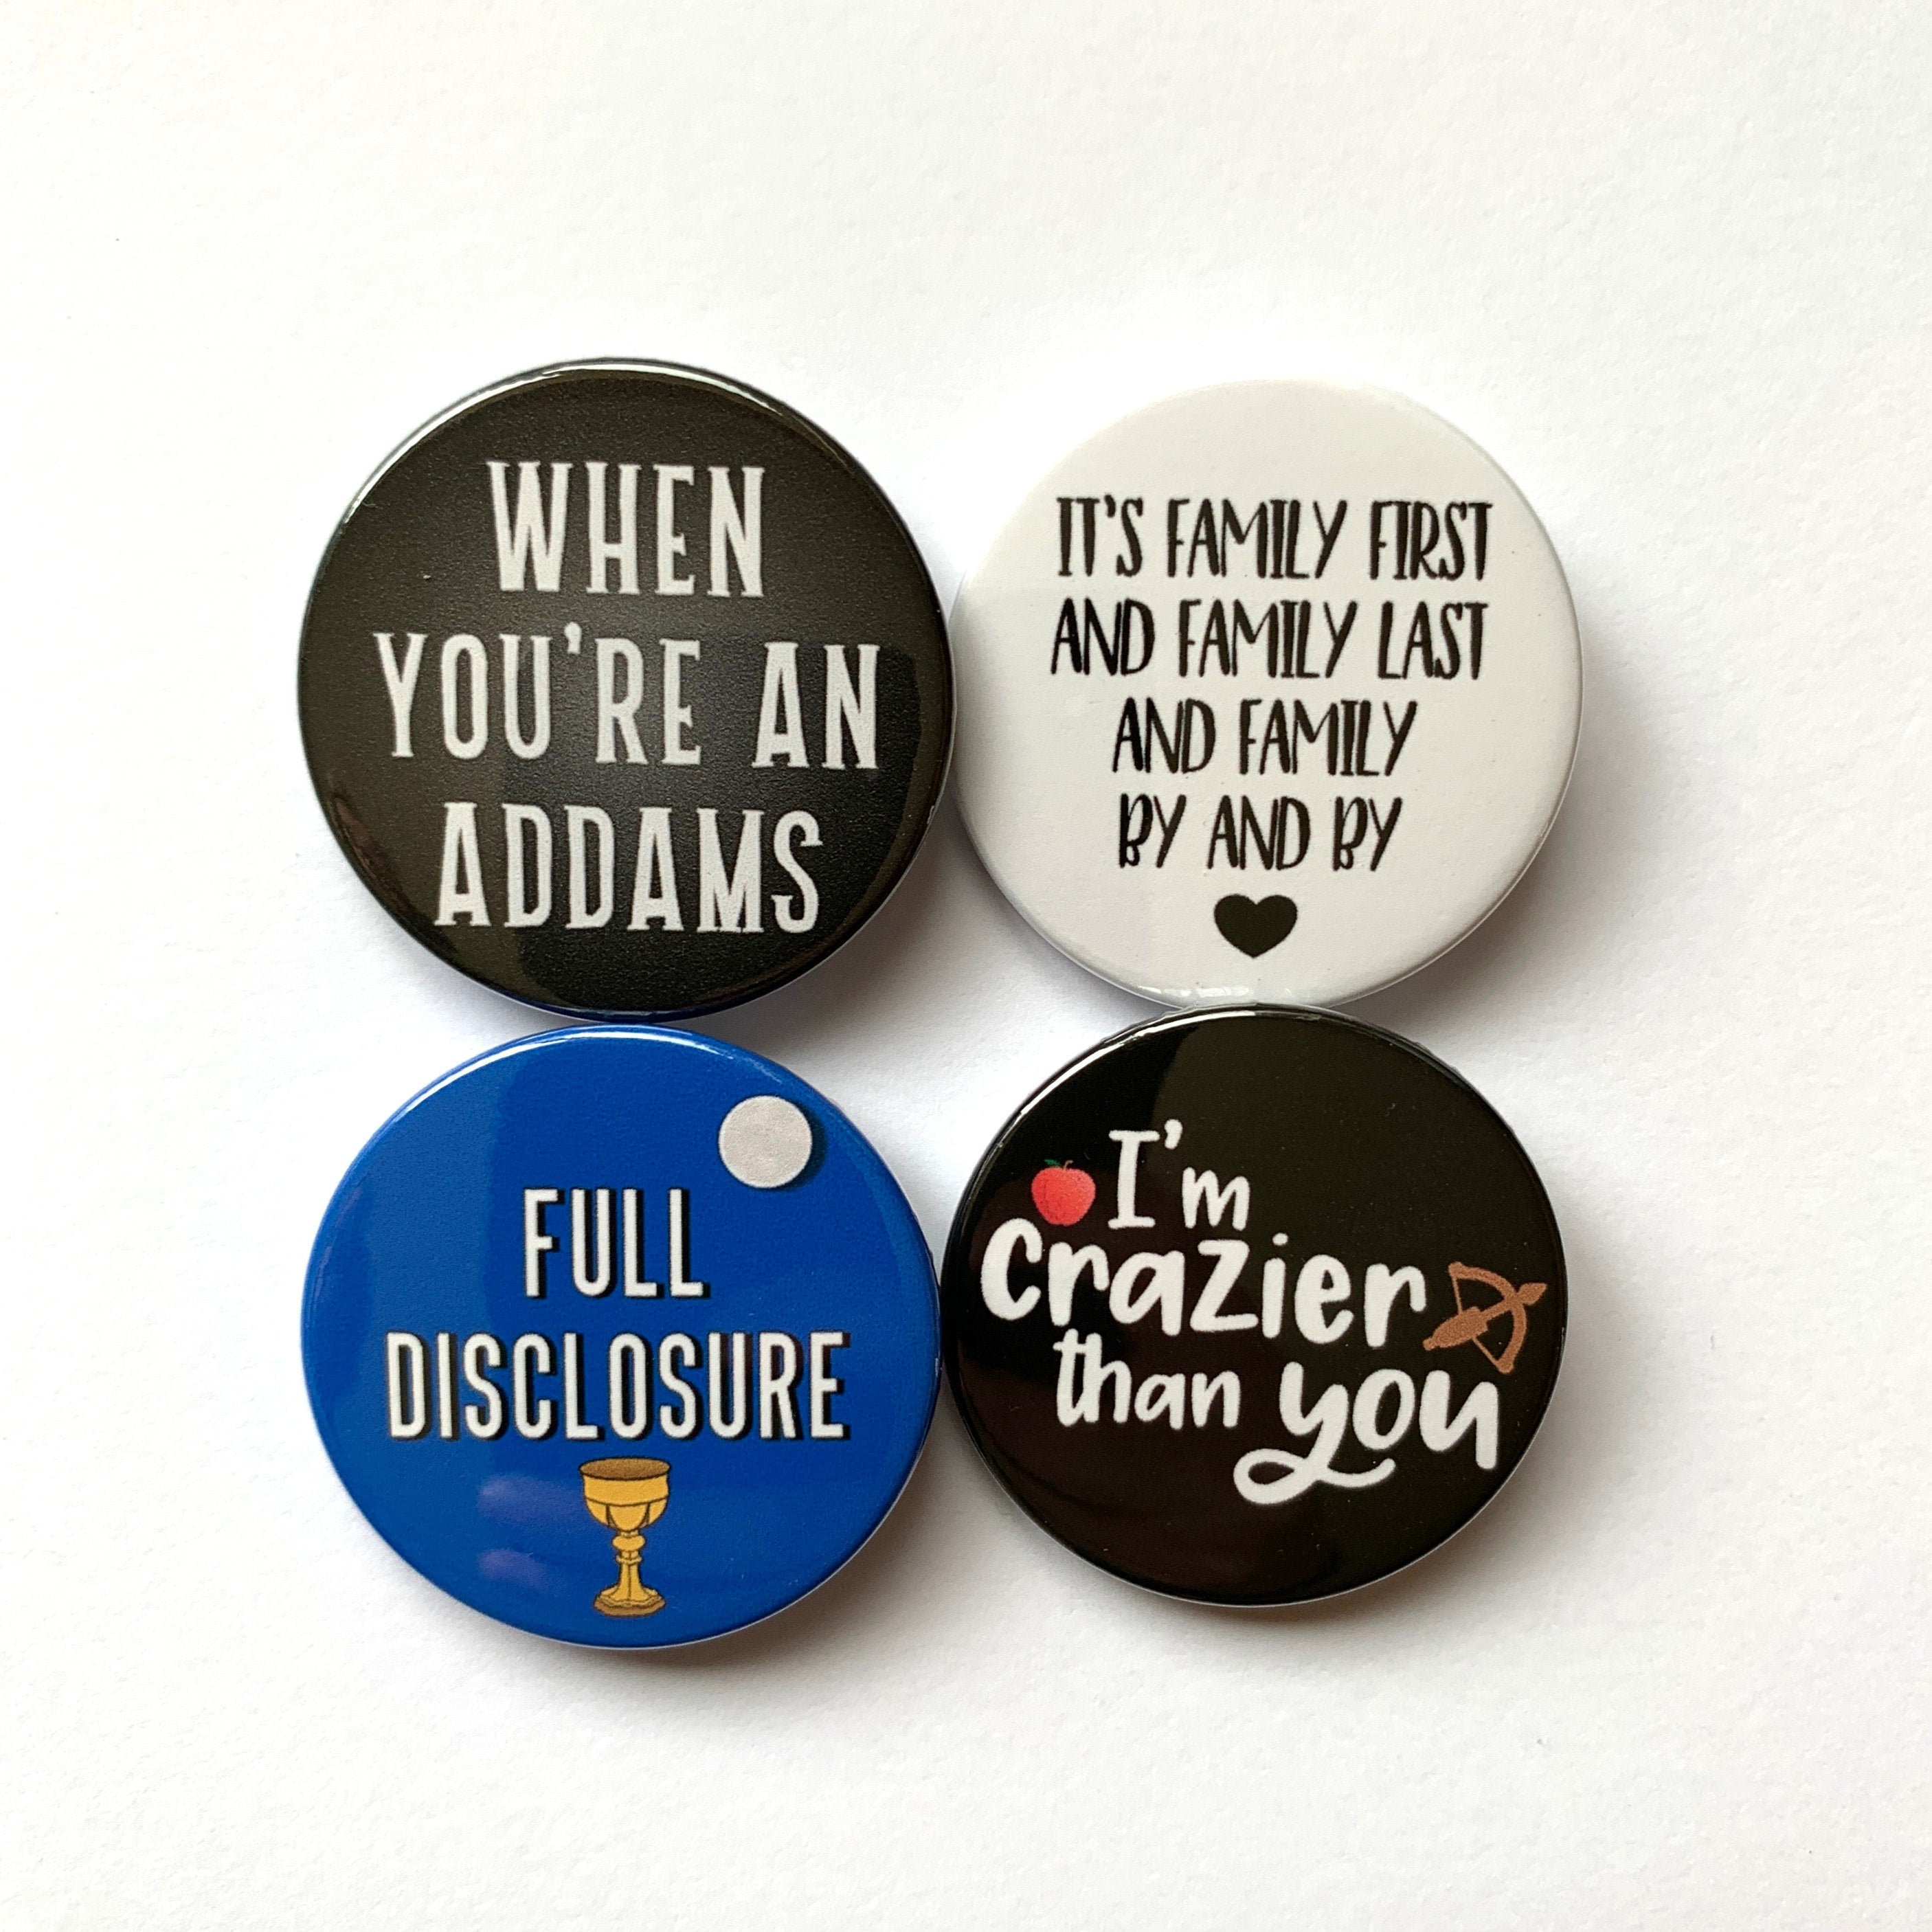 The Addams Family Musical Inspired Button/badge or Magnet image